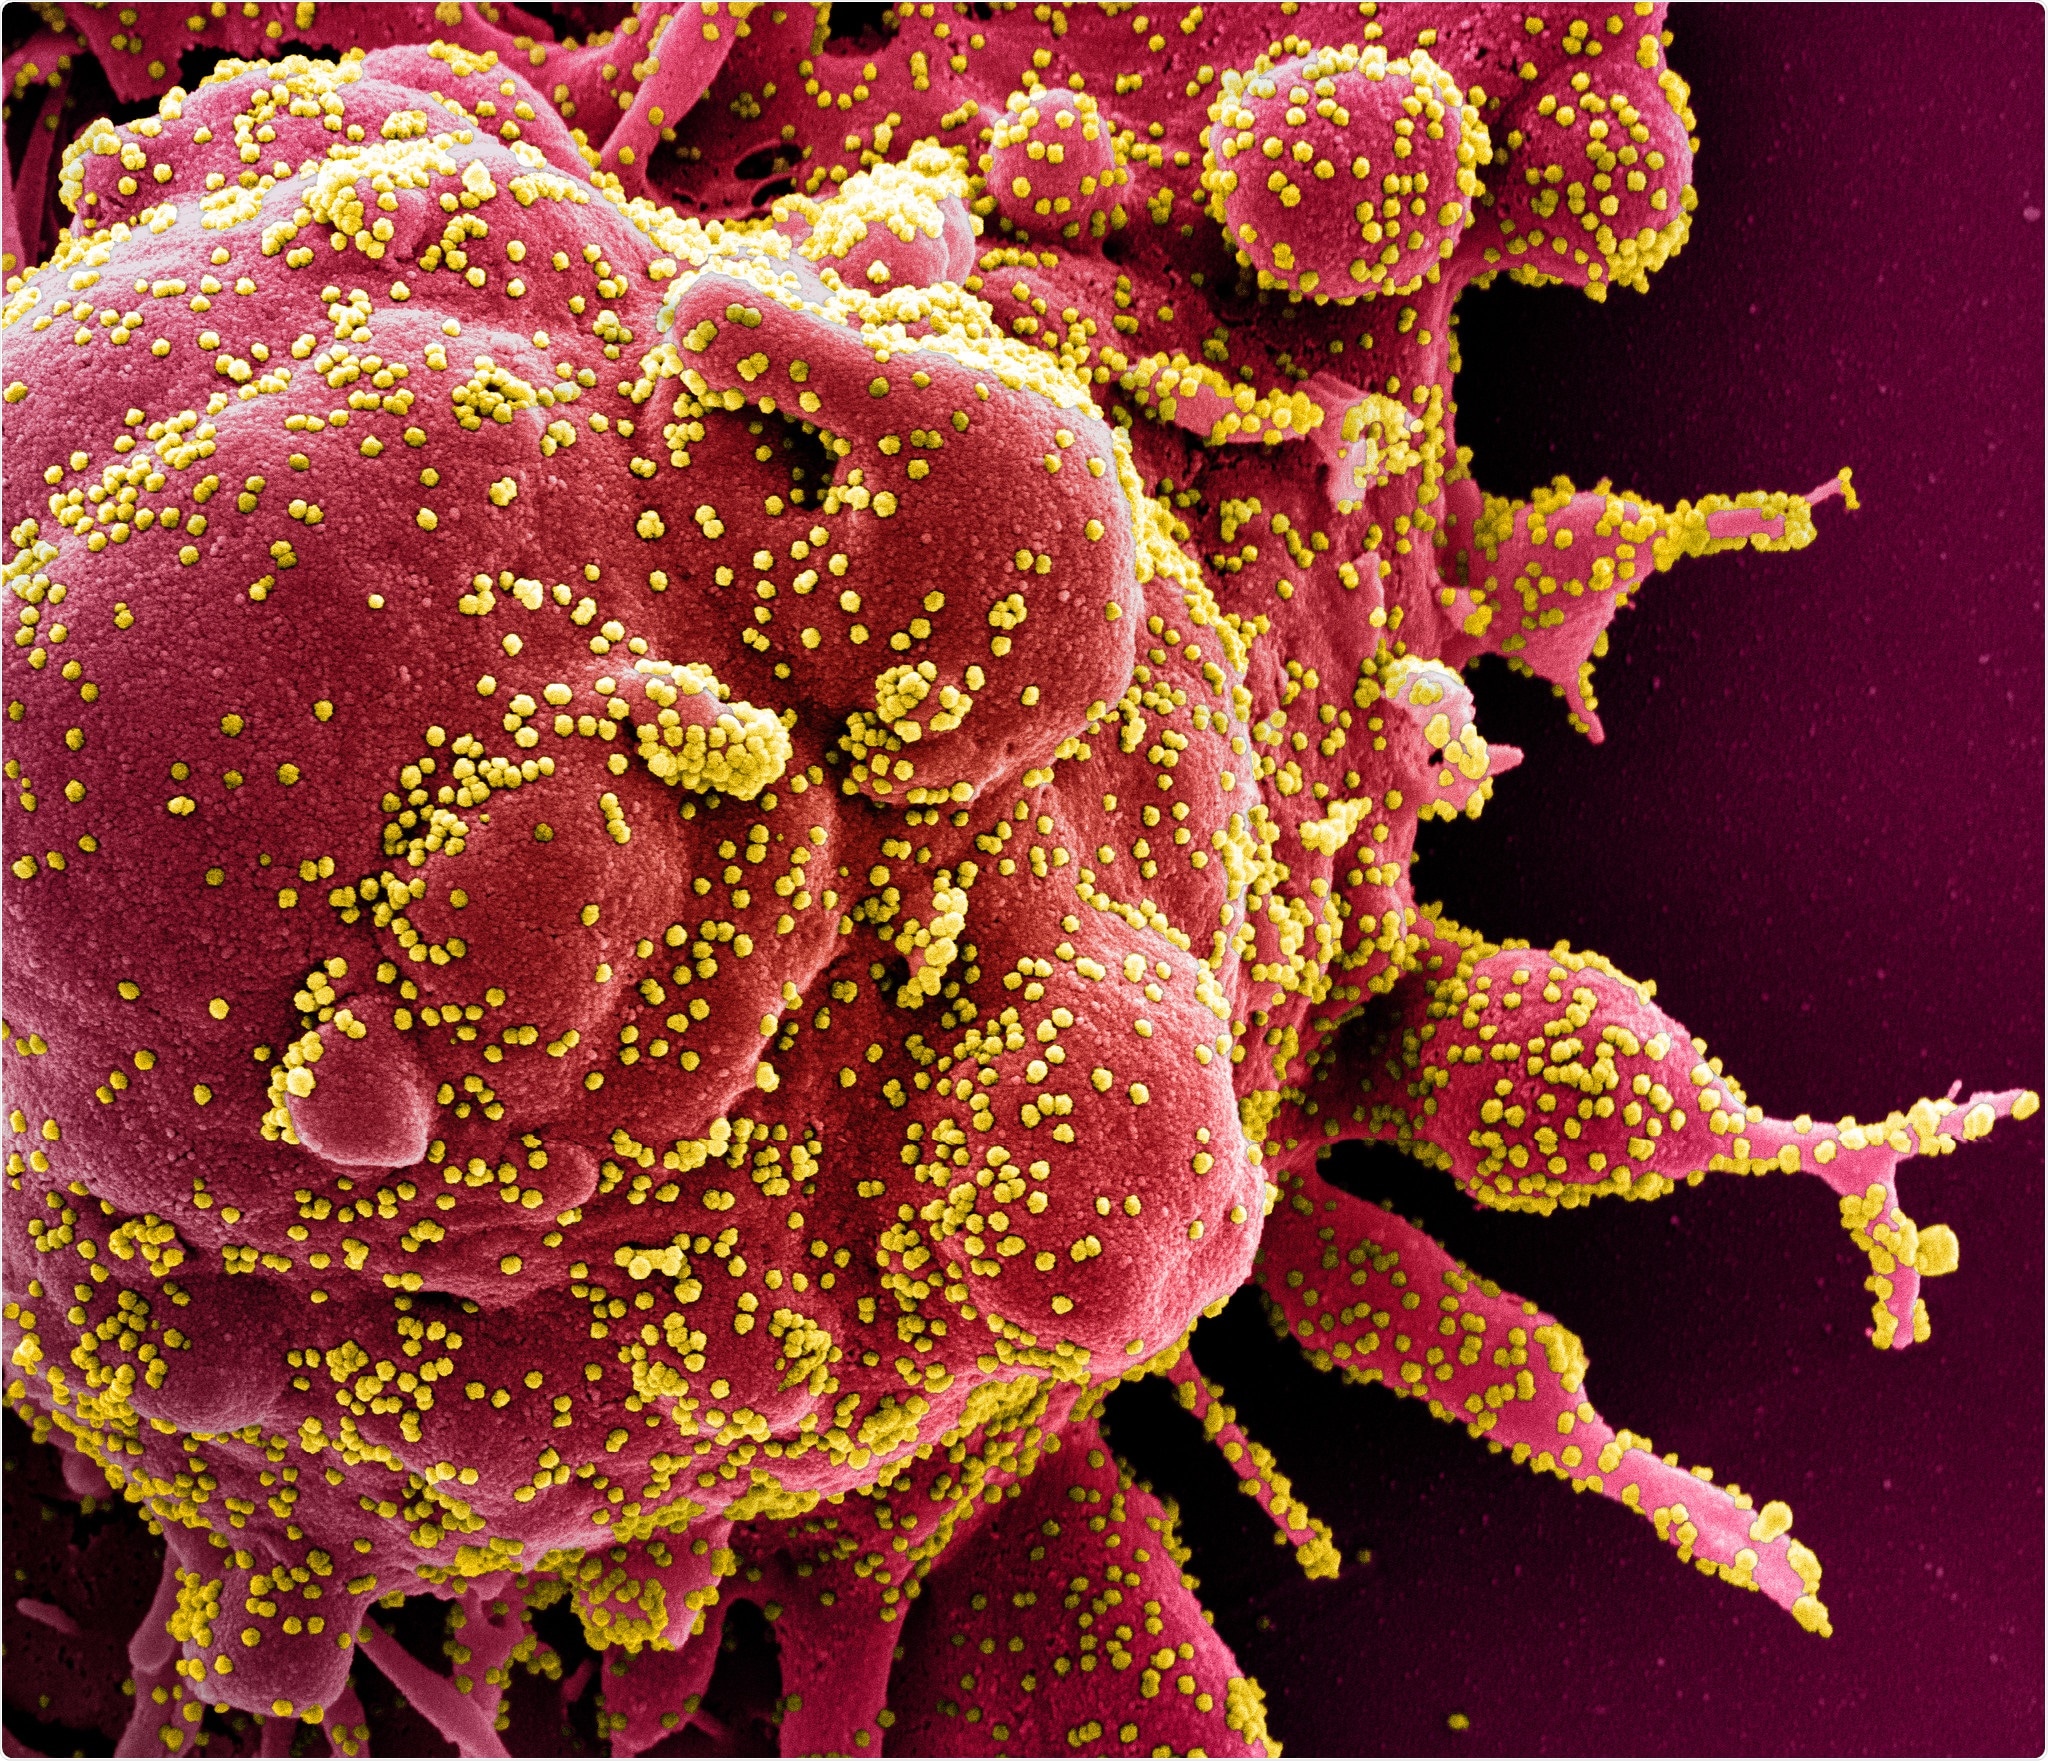 Novel Coronavirus SARS-CoV-2 Colorized scanning electron micrograph of an apoptotic cell (red) heavily infected with SARS-COV-2 virus particles (yellow), isolated from a patient sample. Image captured at the NIAID Integrated Research Facility (IRF) in Fort Detrick, Maryland. Credit: NIAID